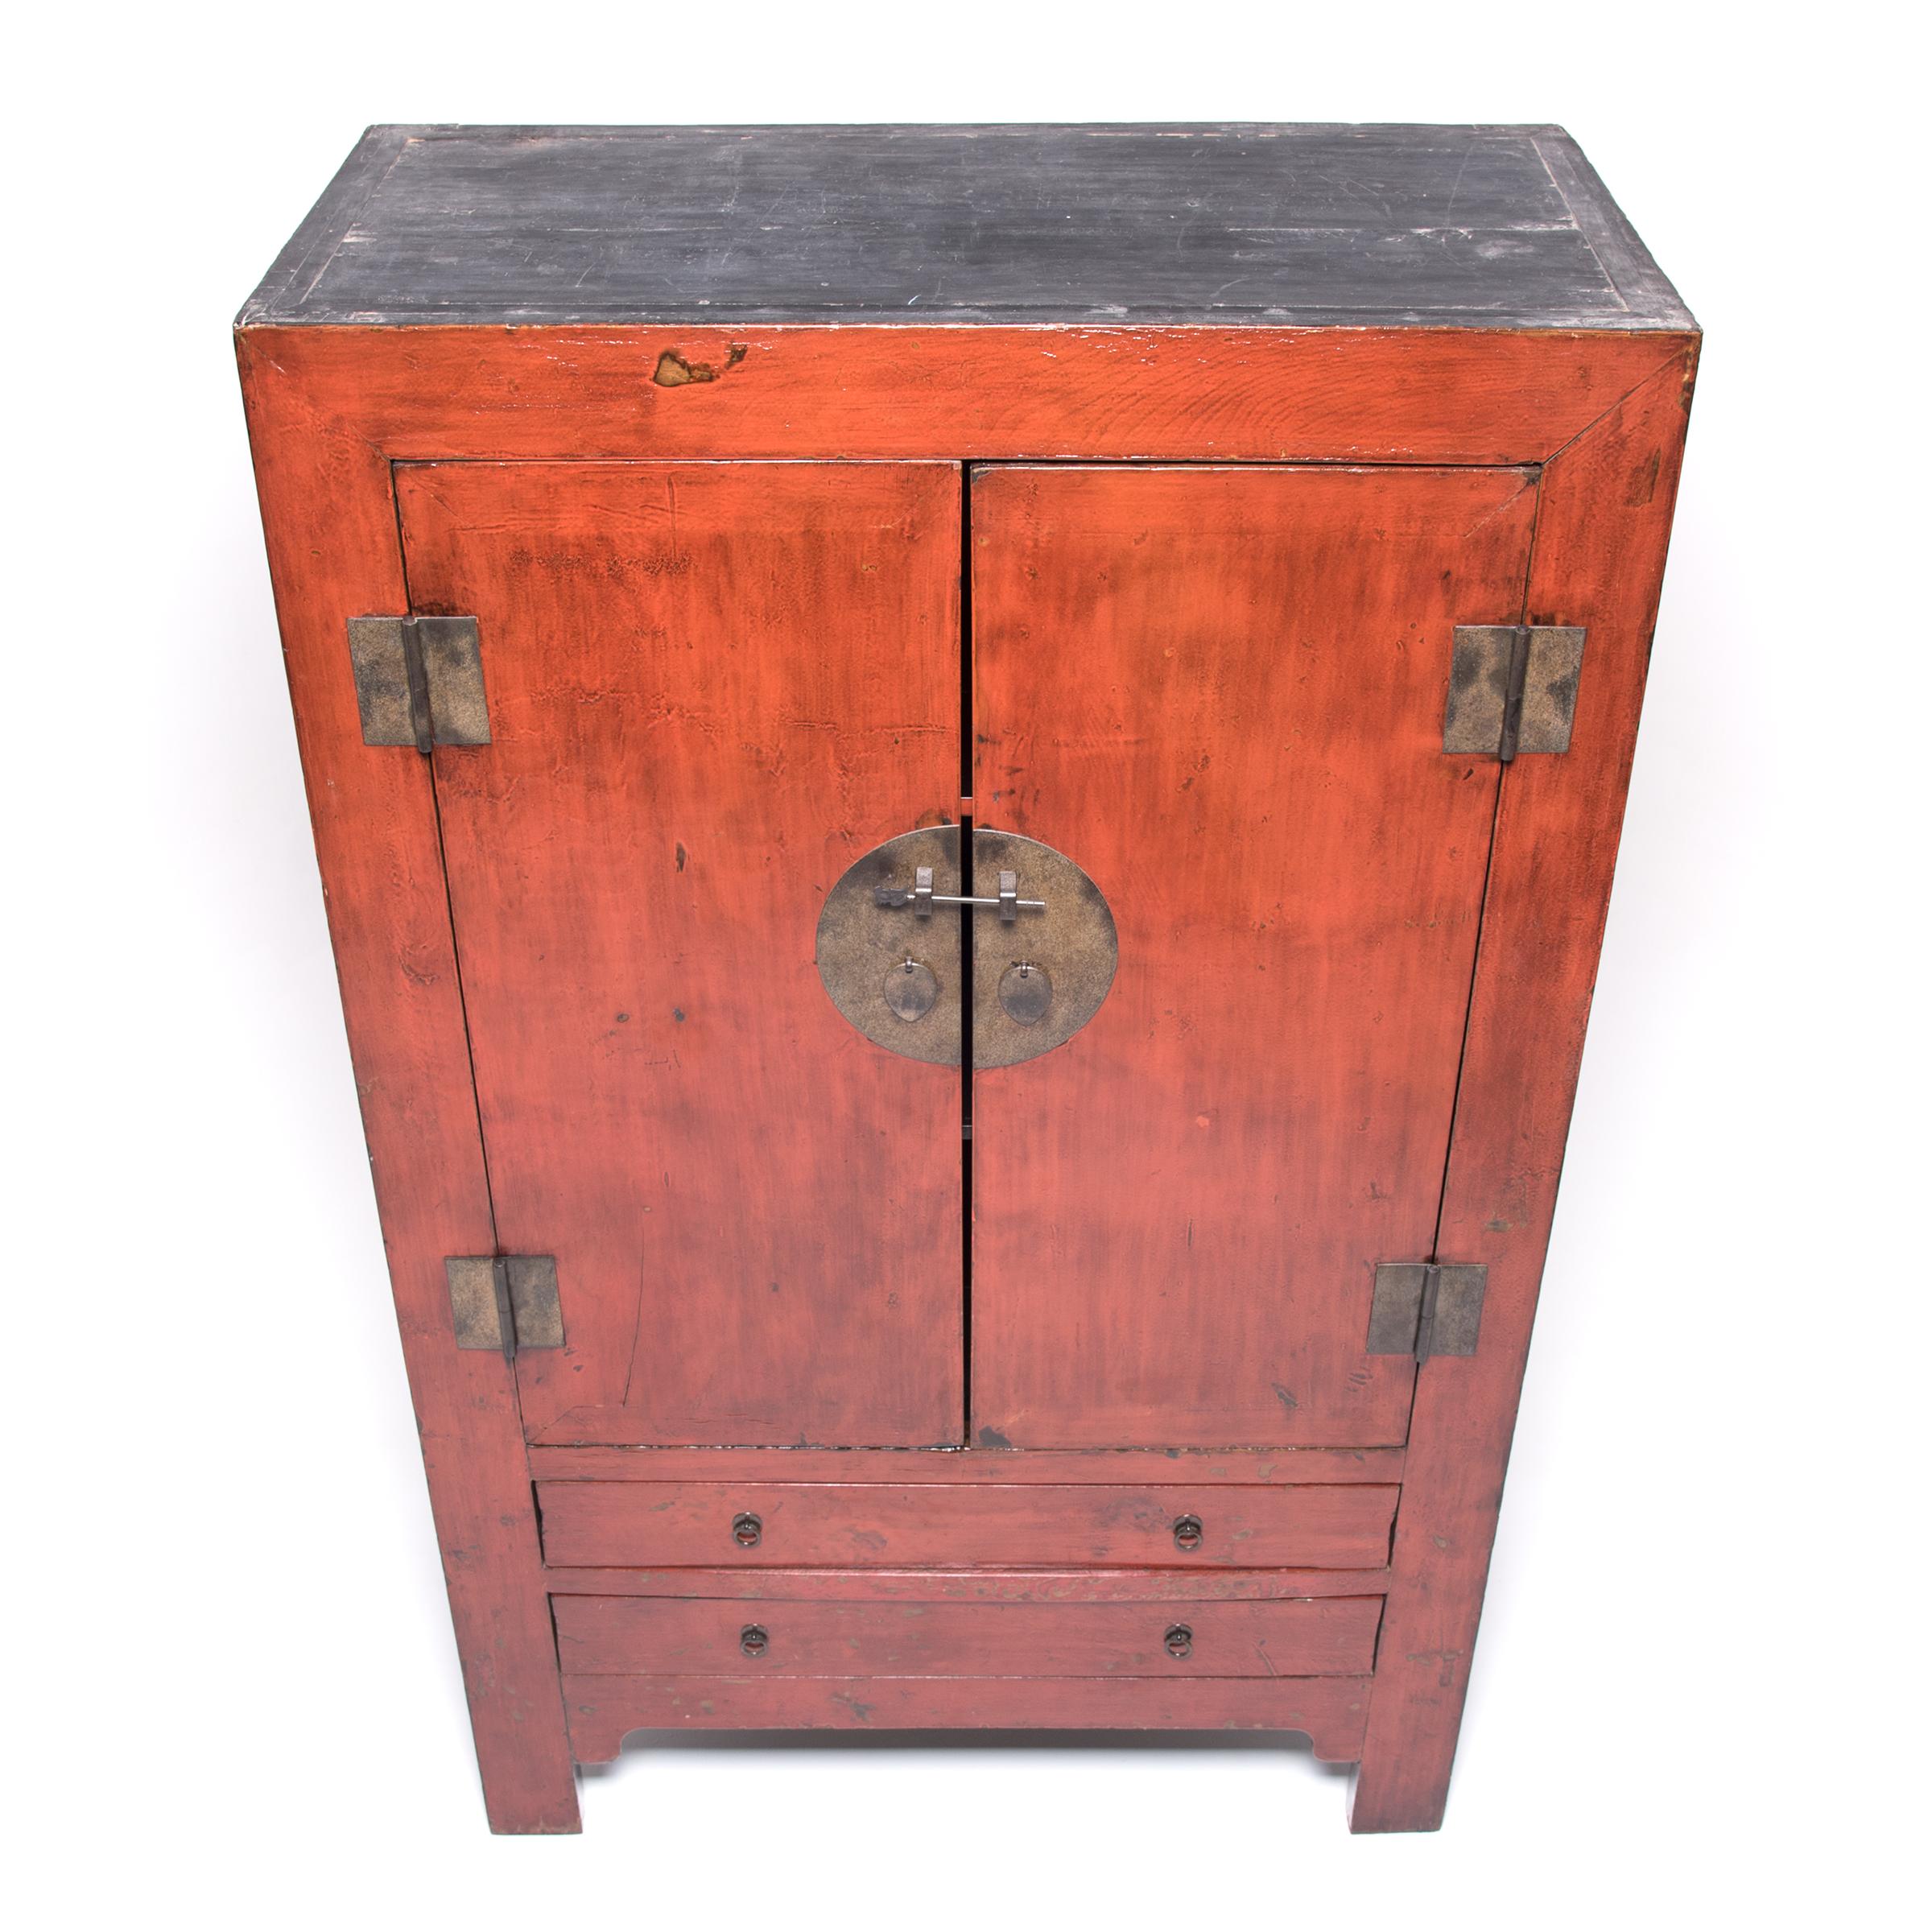 Brass Chinese Tall Lacquered Dowry Cabinet